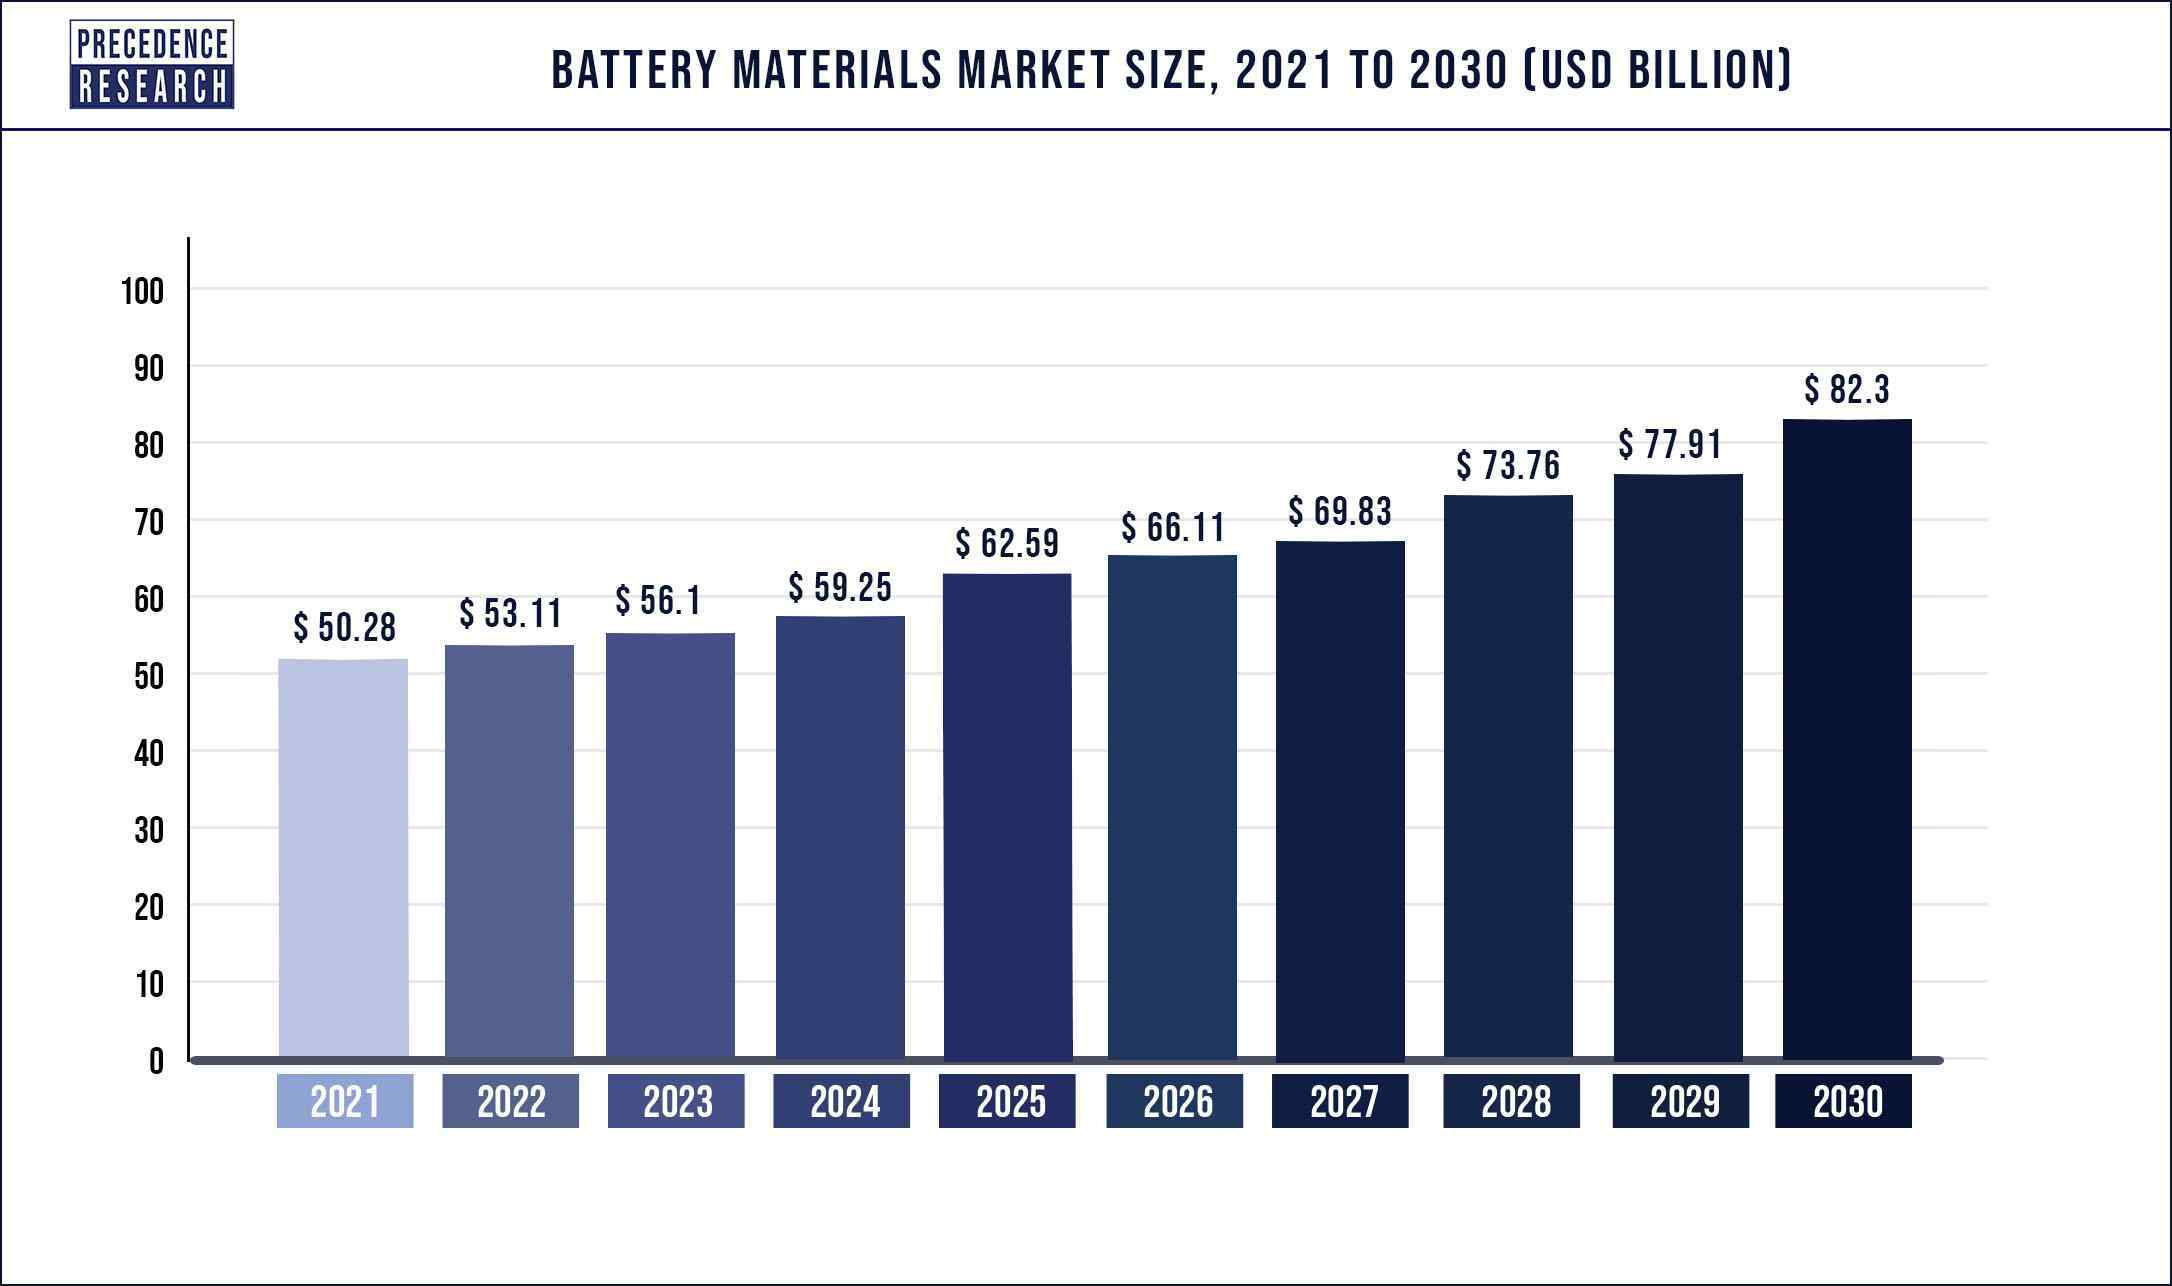 Battery Materials Market Size 2021 to 2030